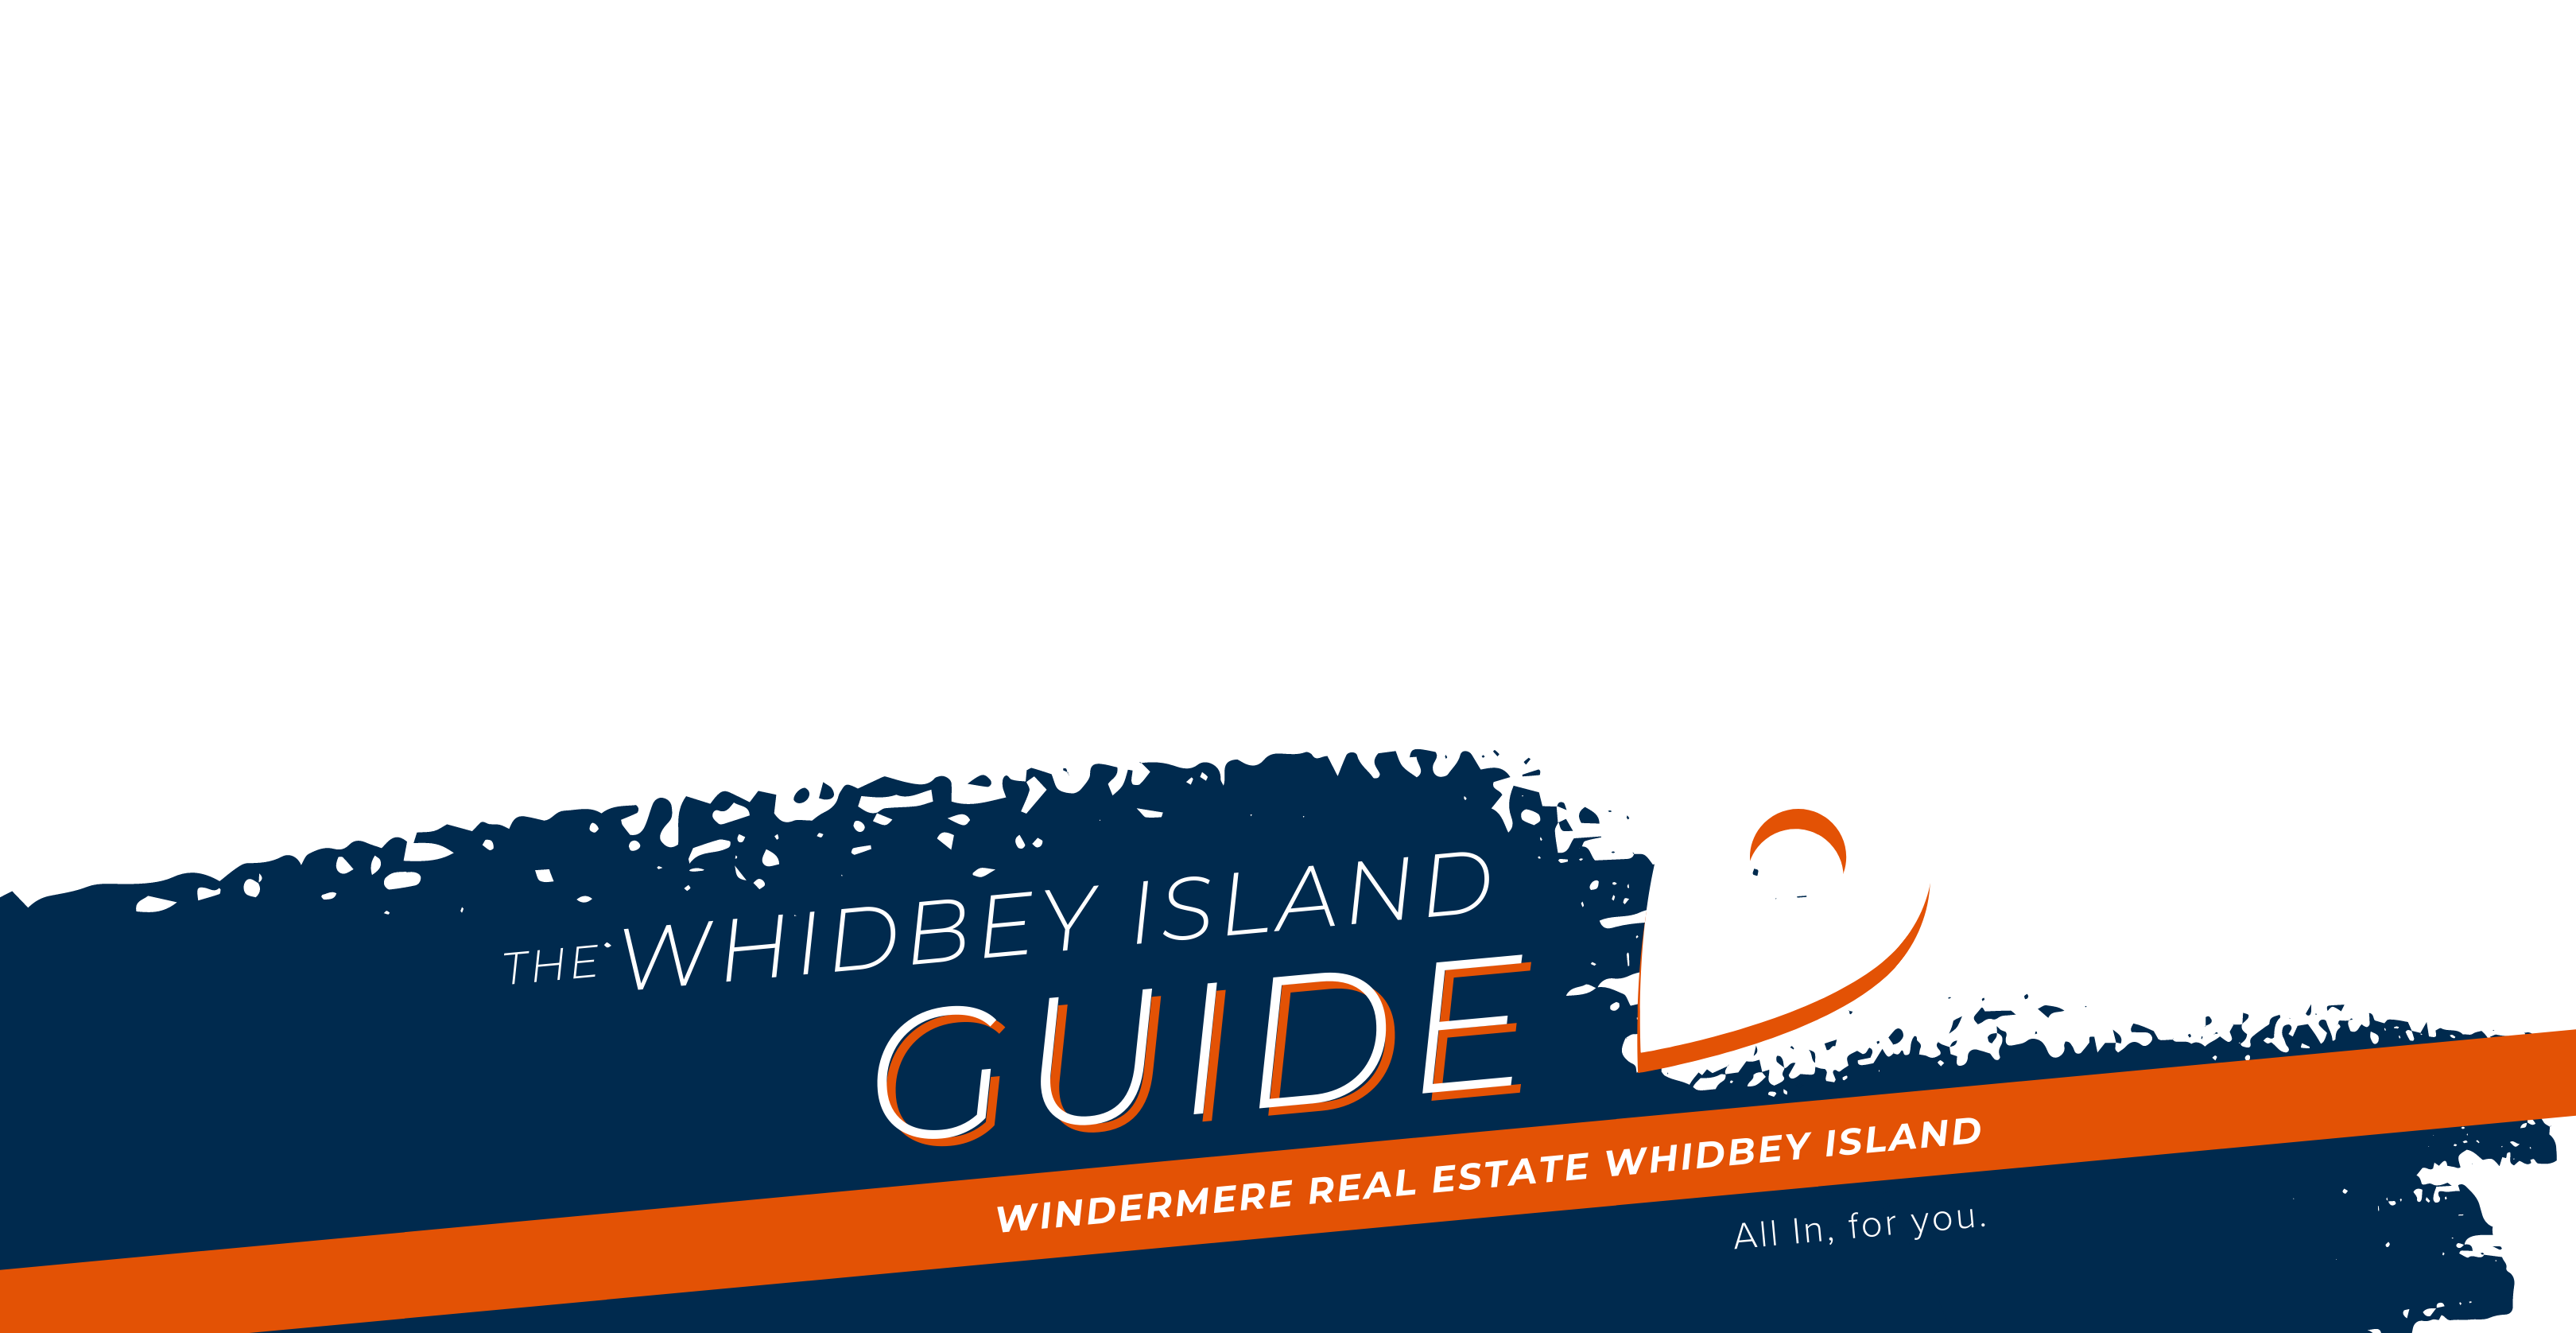 Whidbey Island Guide